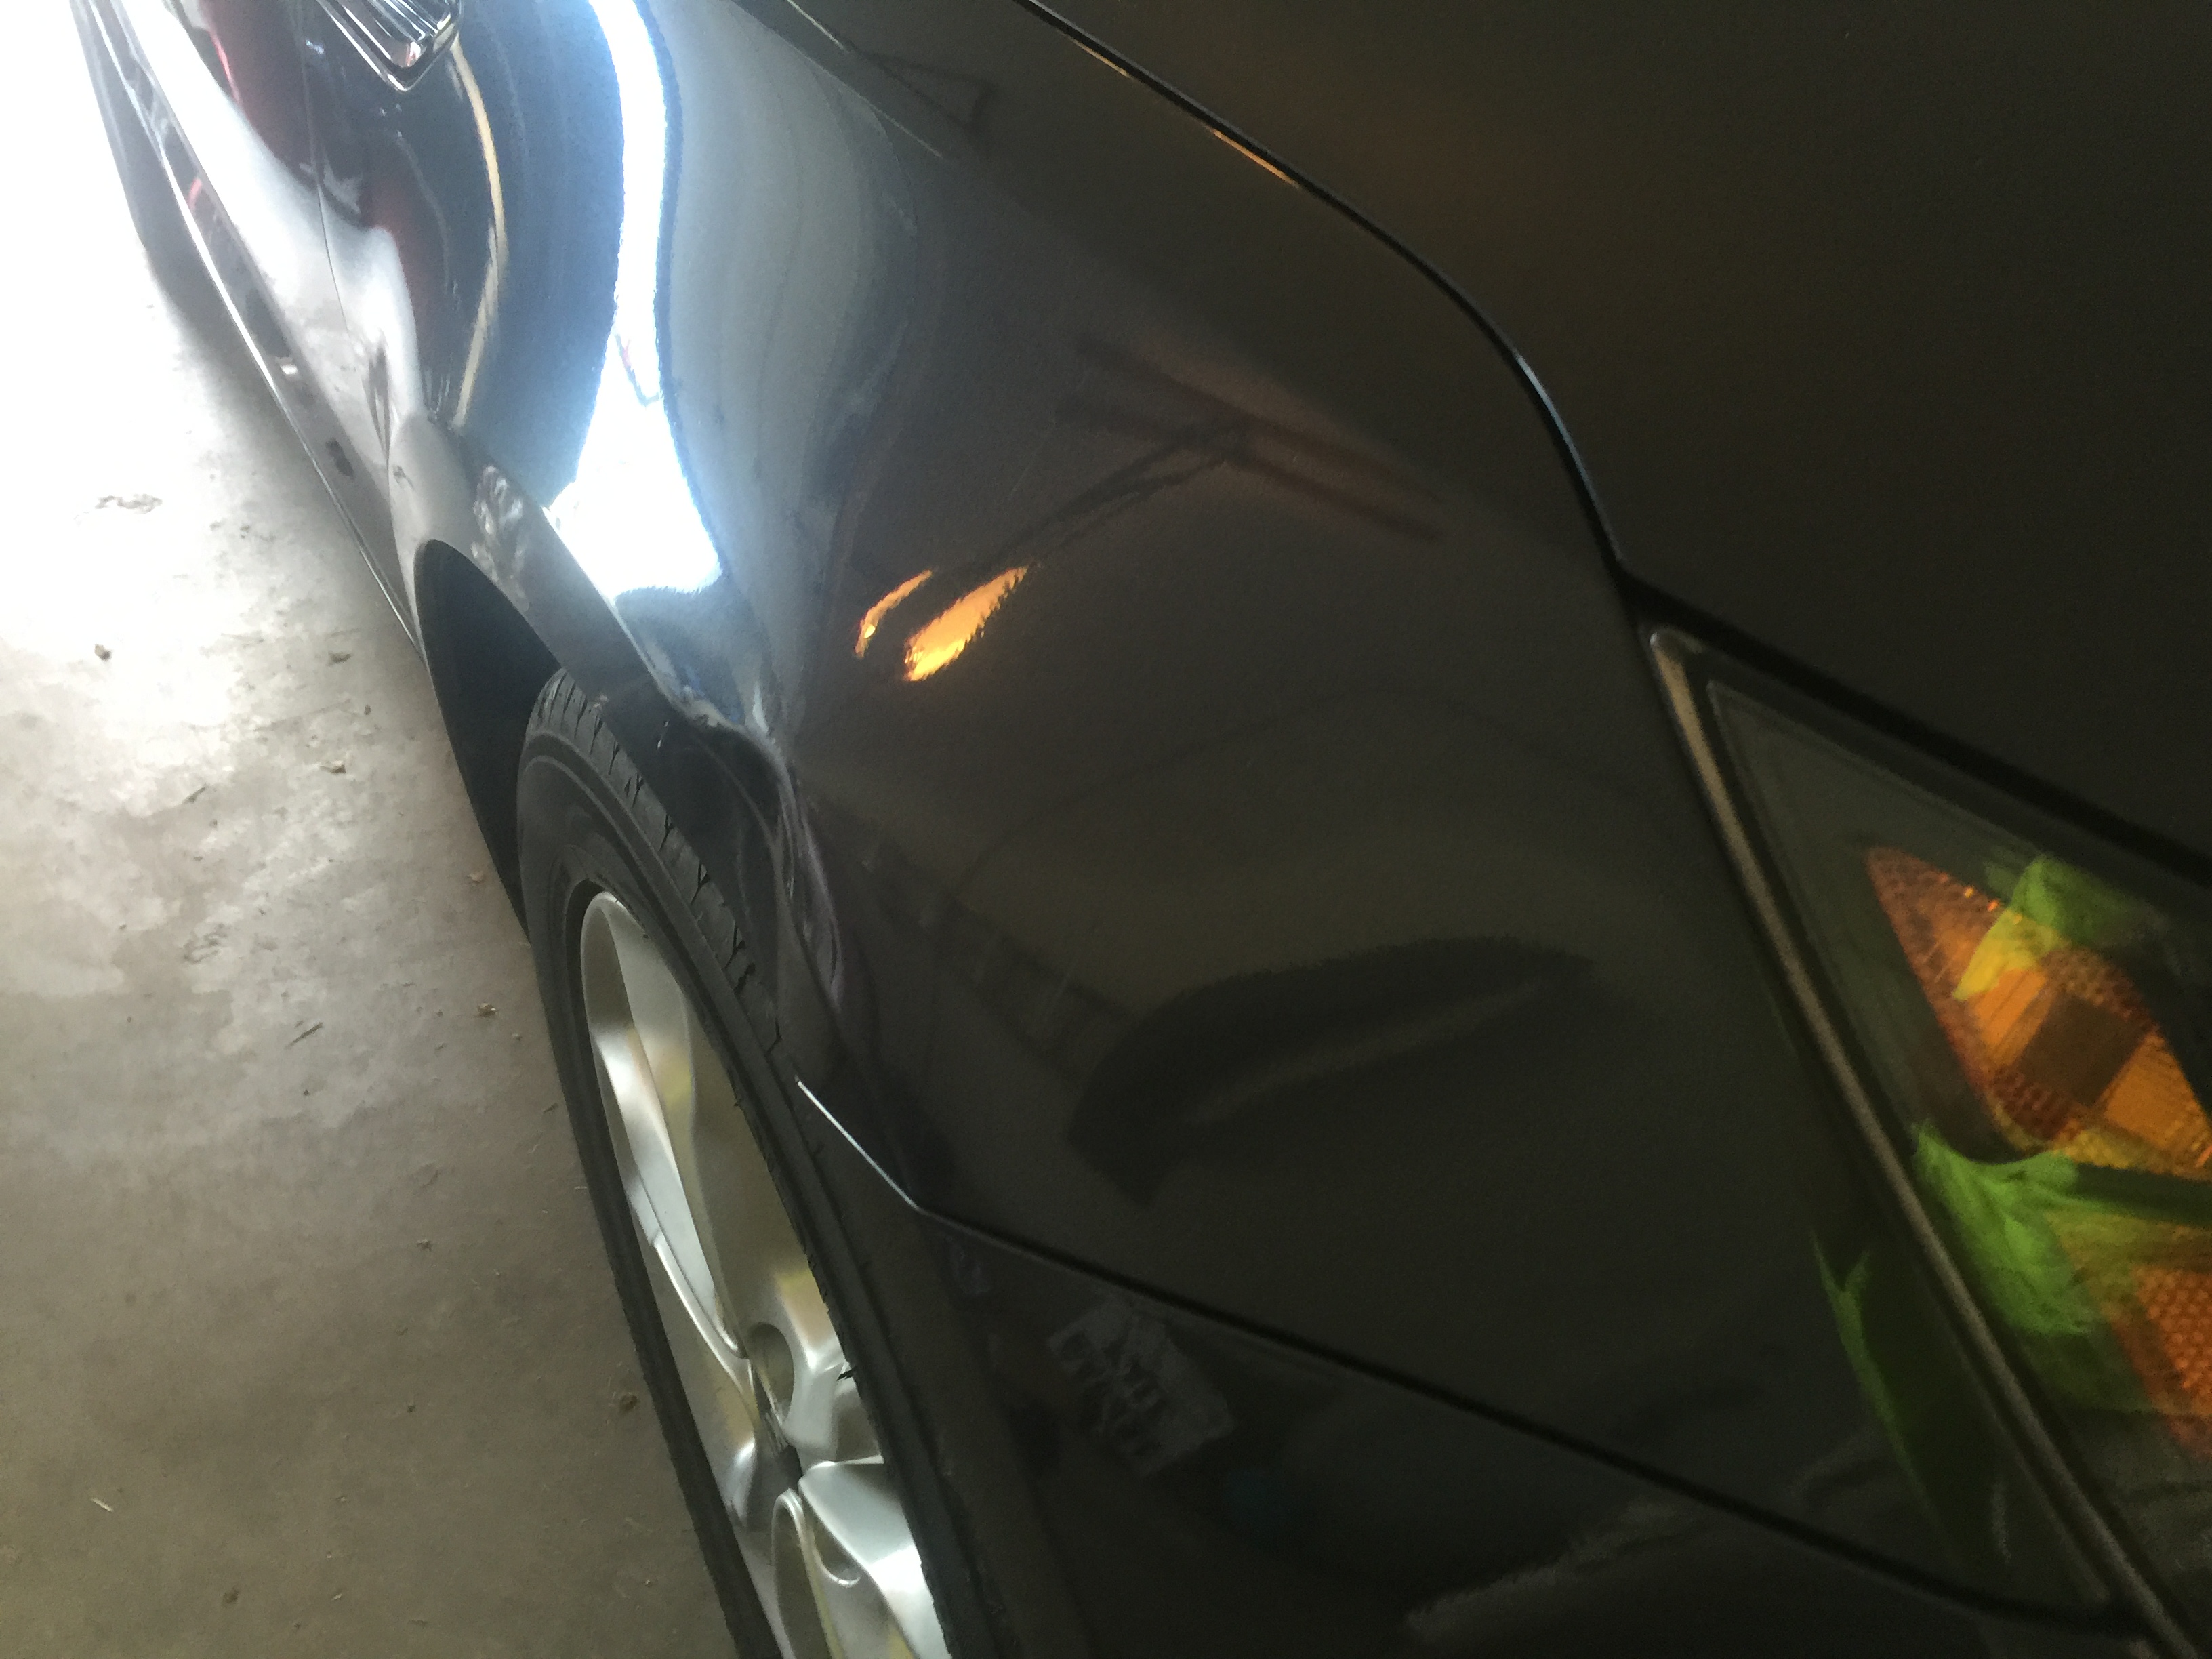 2011 Kia Optima Fender dent repair, with paintless dent removal process, large dent repair, in Springfield, IL. http://217dent.com